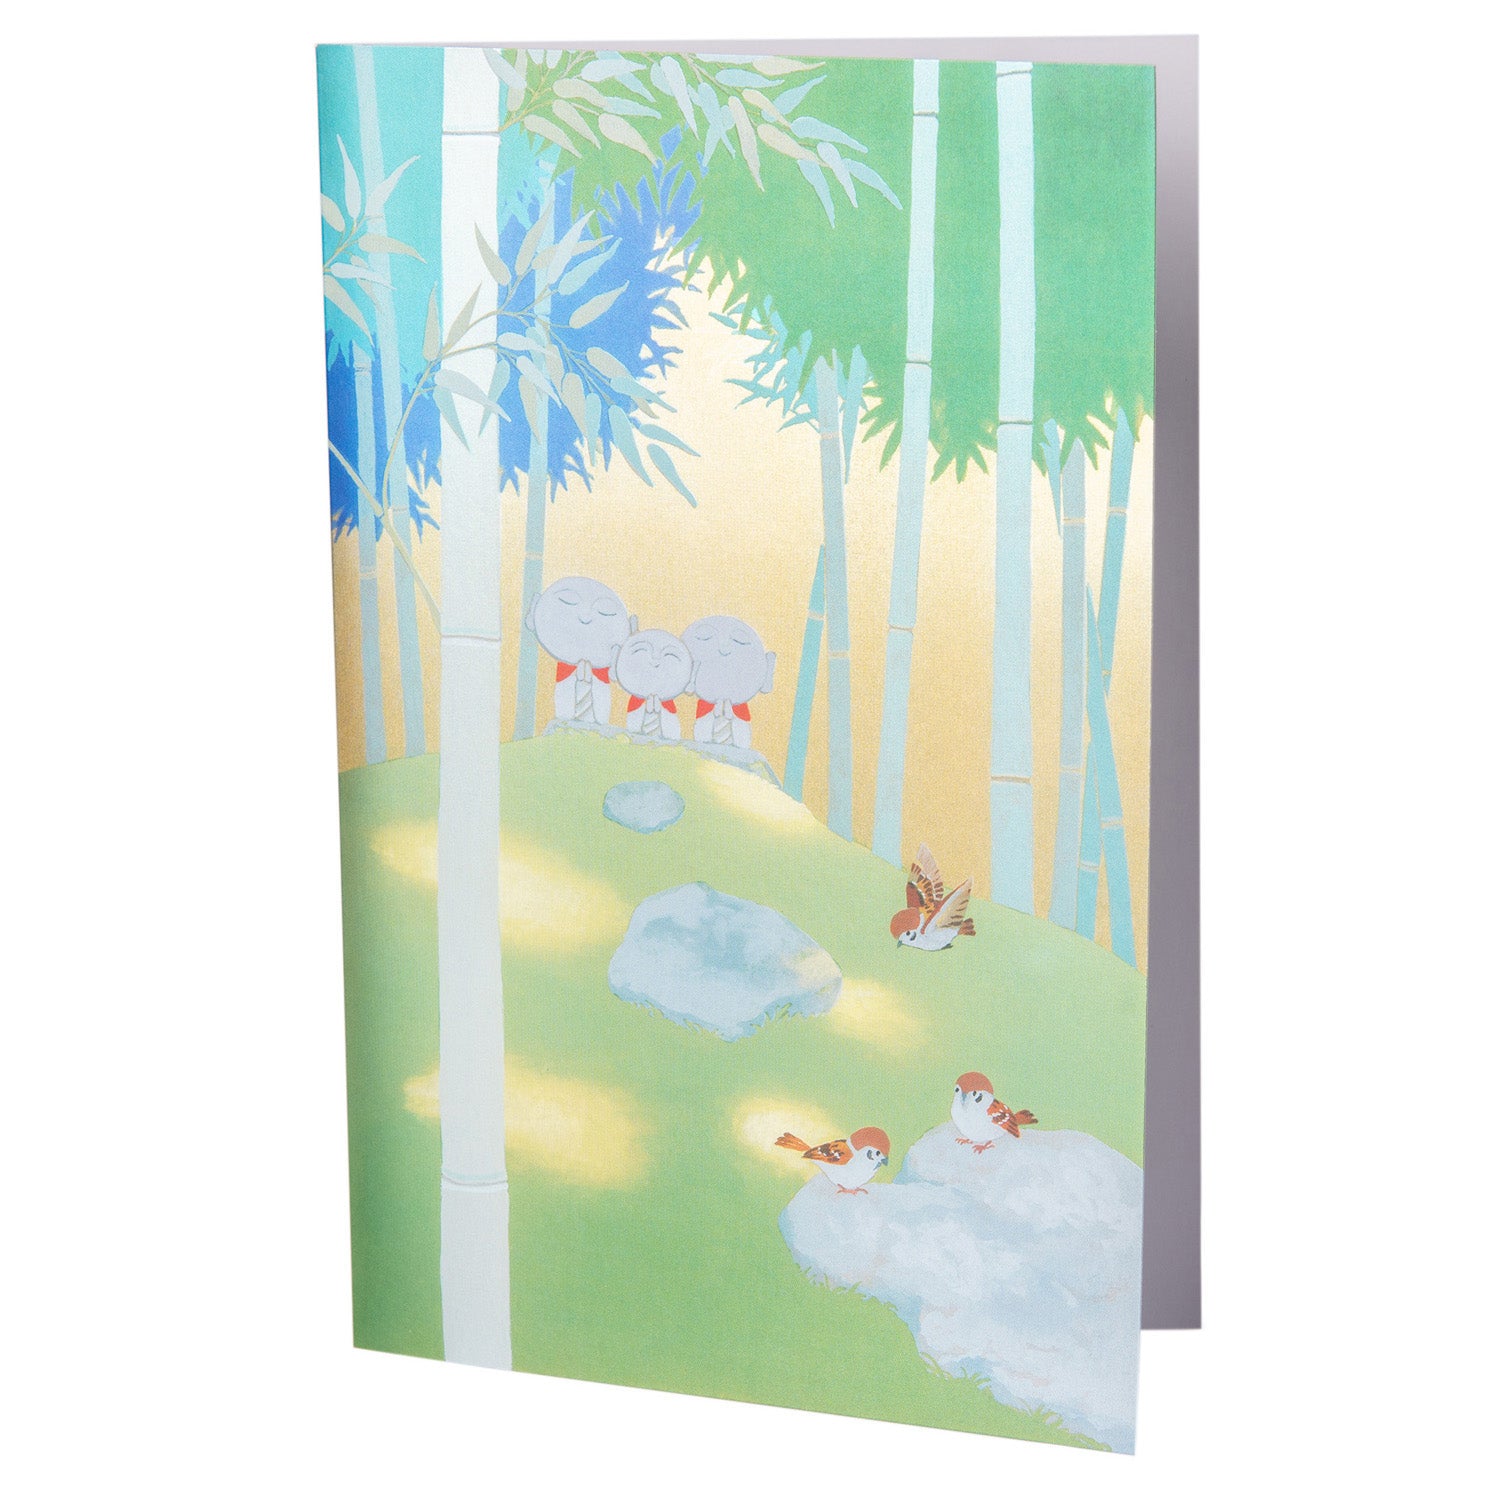 Buddhas in a Bamboo Forest Japanese Card